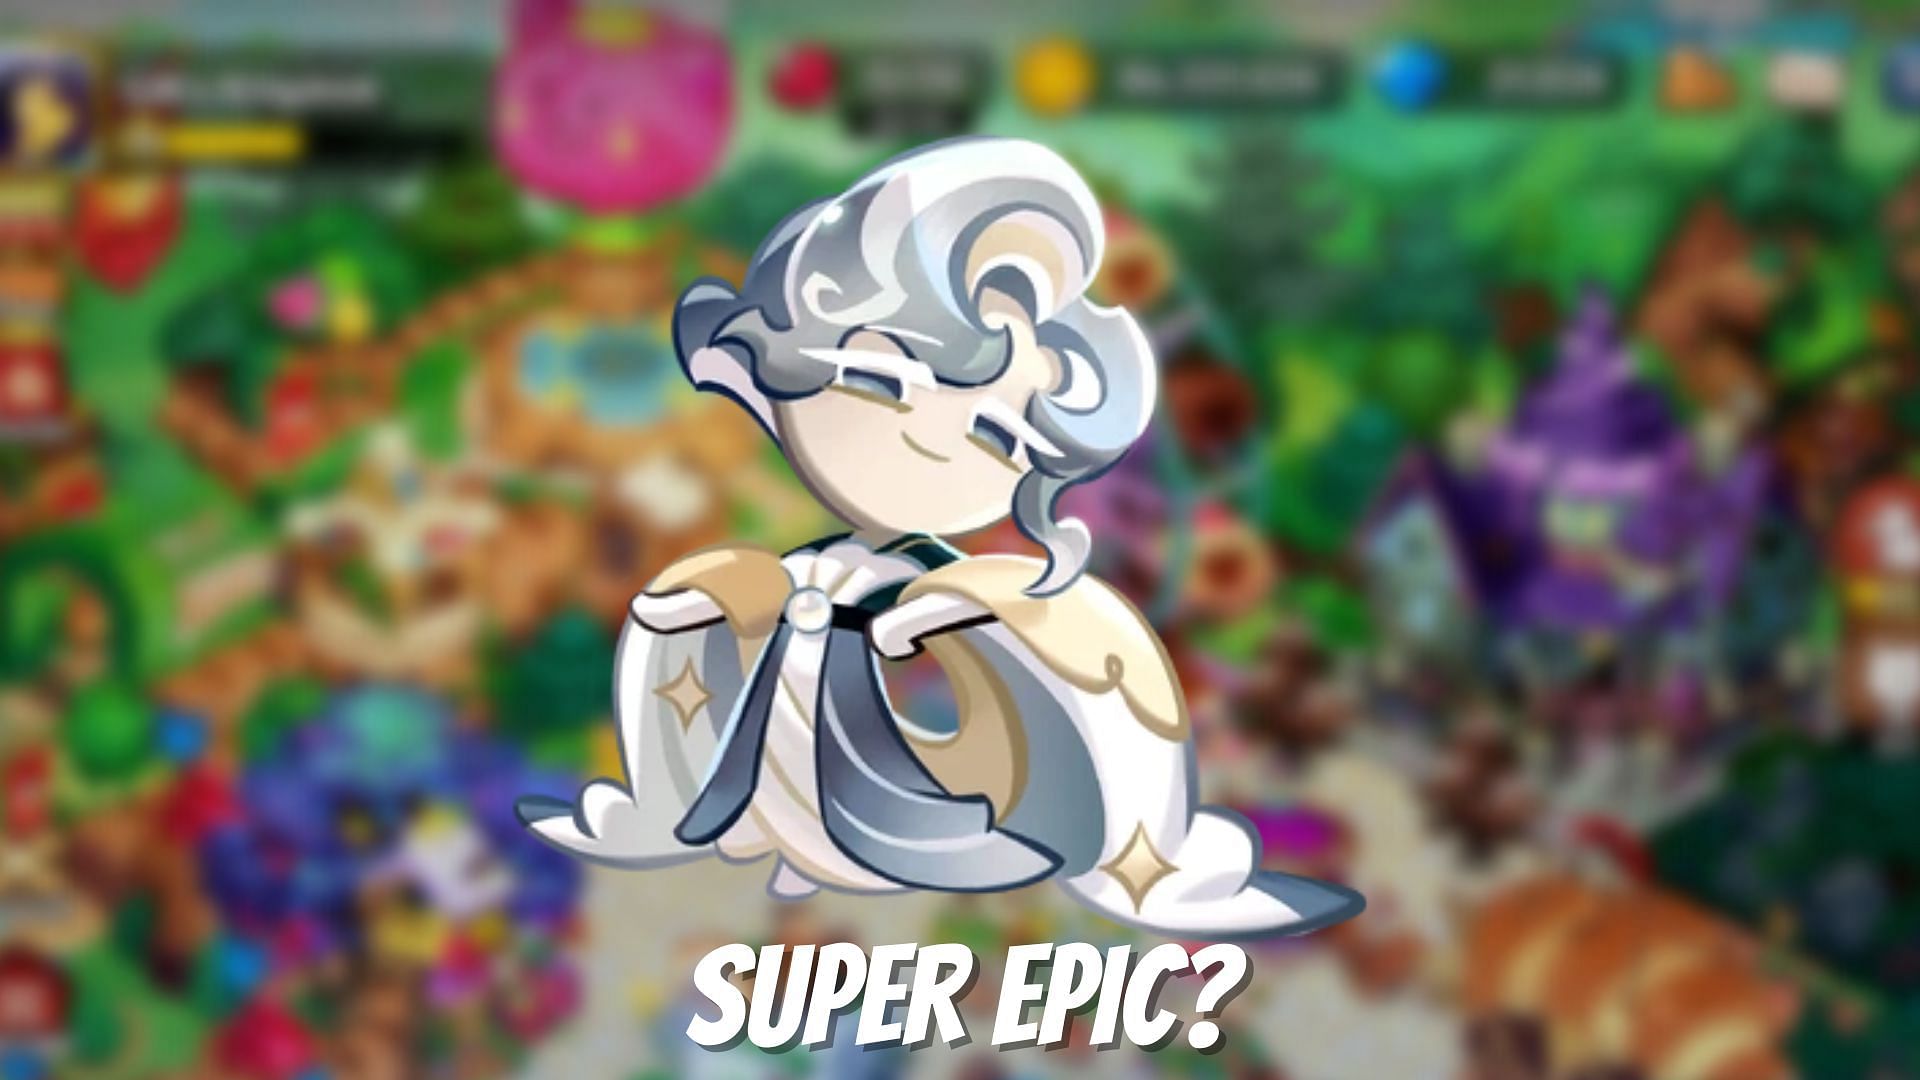 Super Epic is a new tier in Cookie Run: Kingdom between Epic and Ancient (Image via Sportskeeda)